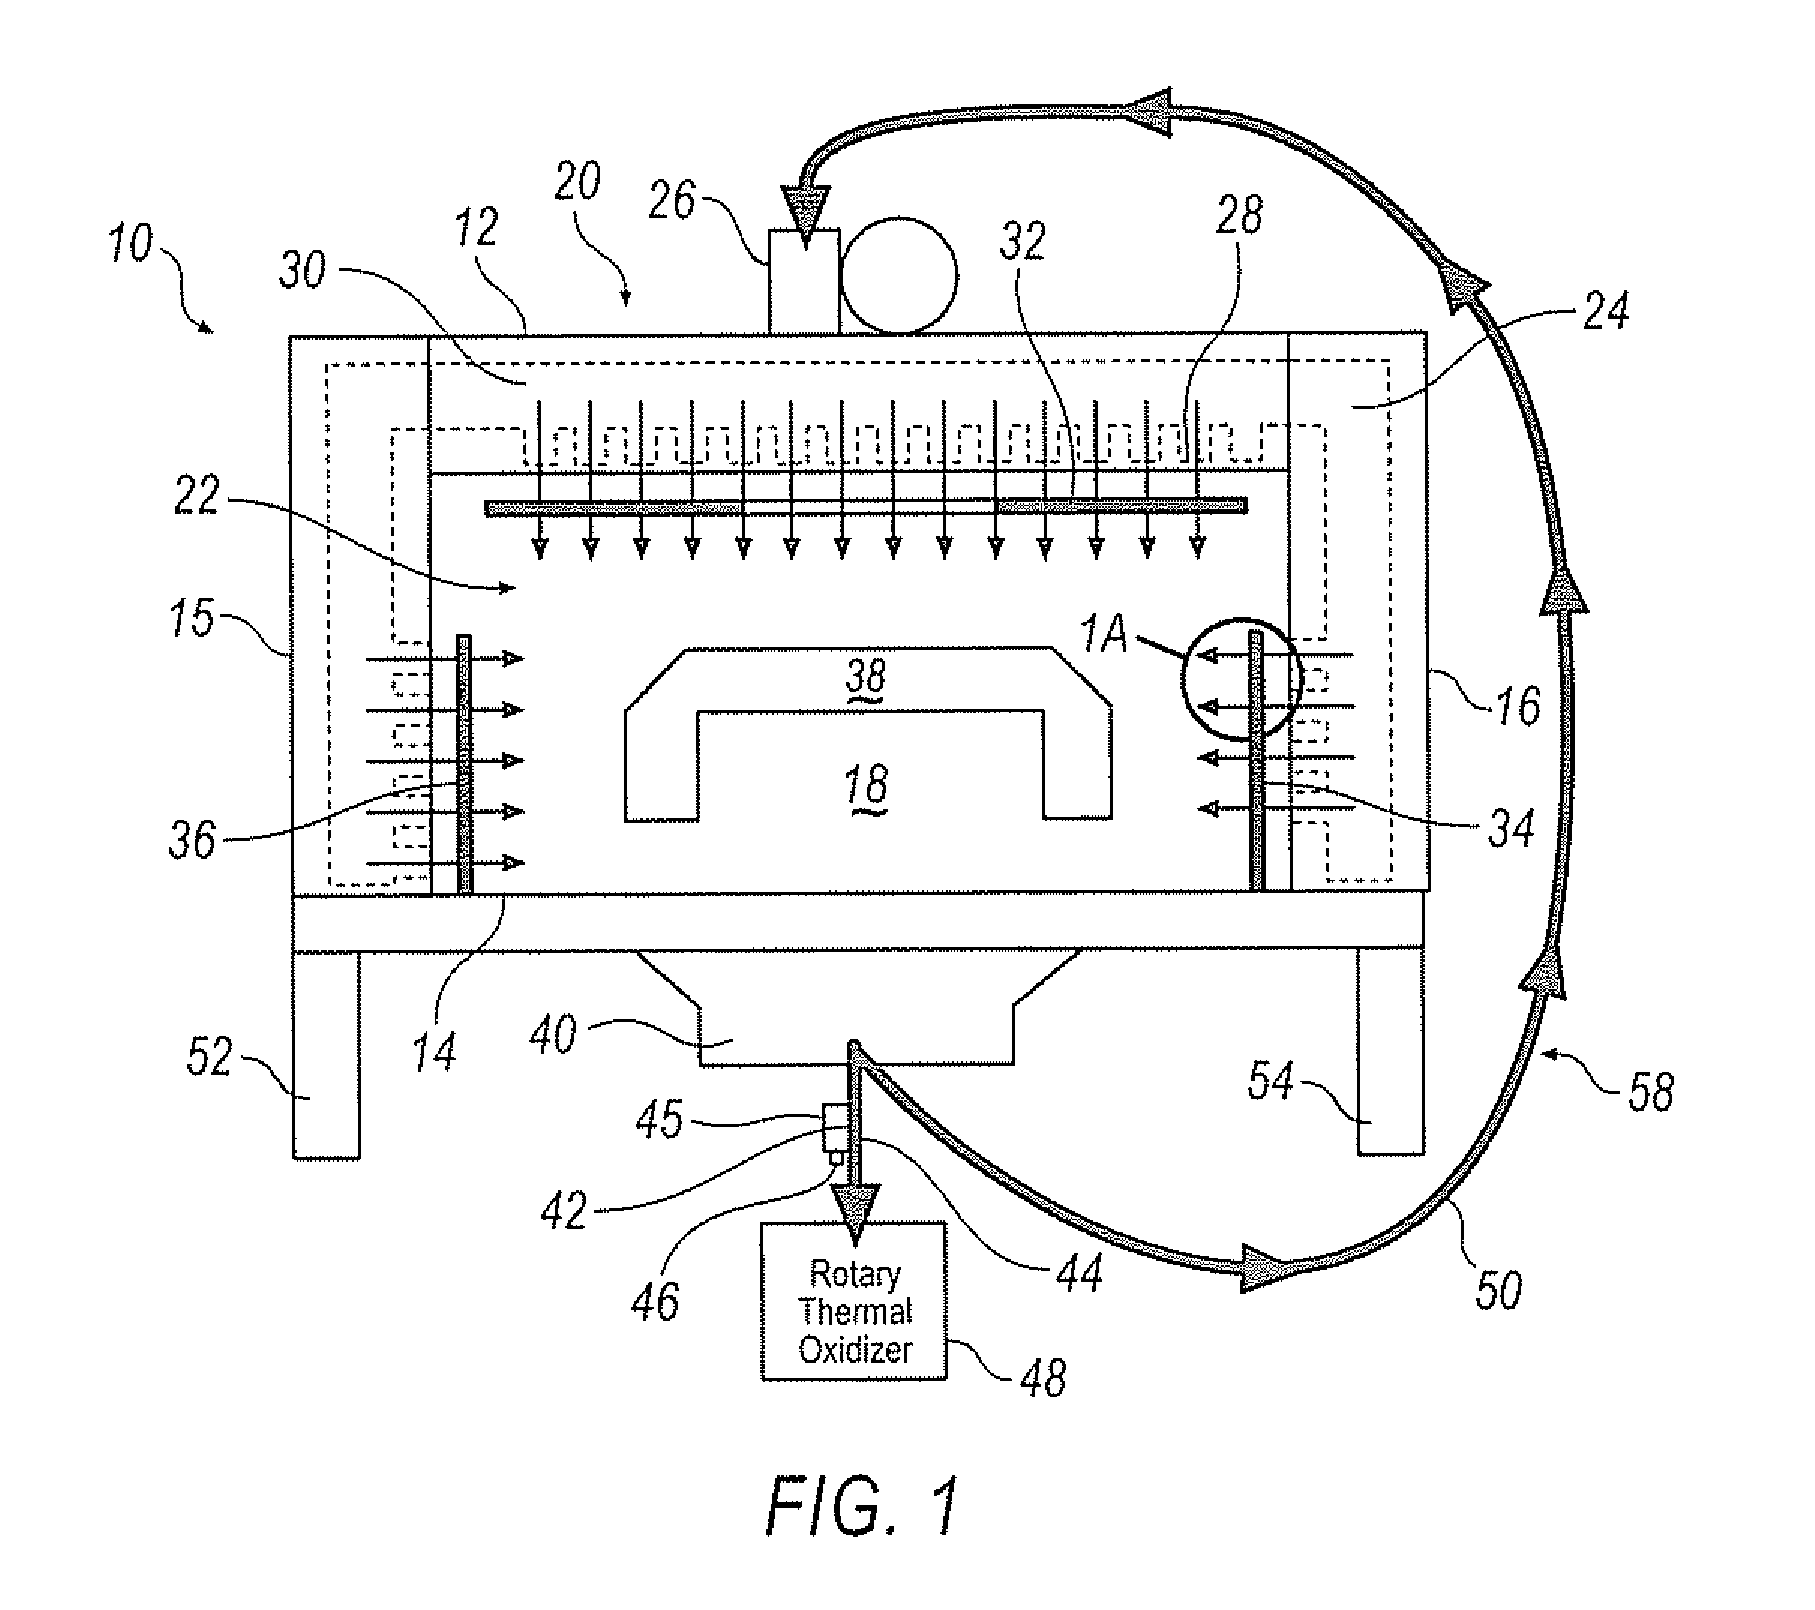 Waterless, low volatile organic compound and carbon dioxide emission, modular paint system and method of performing the same